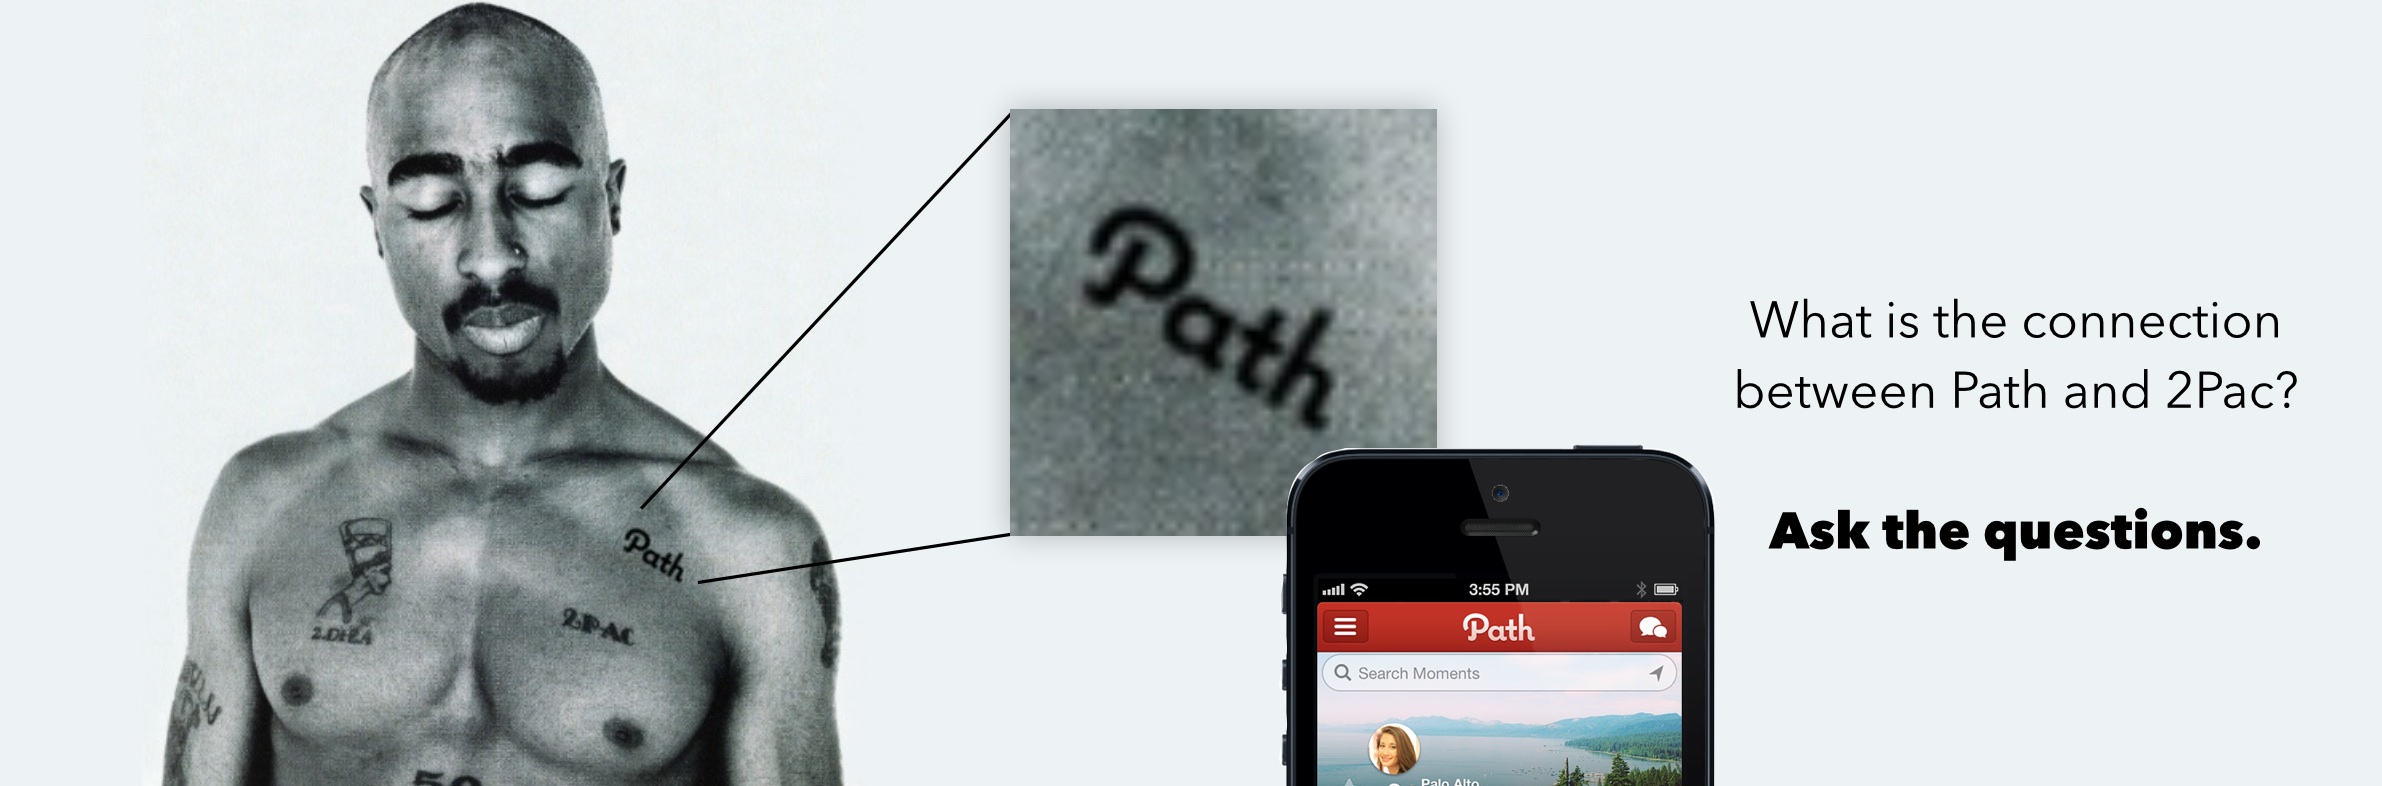 Is Path a money laundering front for Tupac Shakur? Teach the controversy.